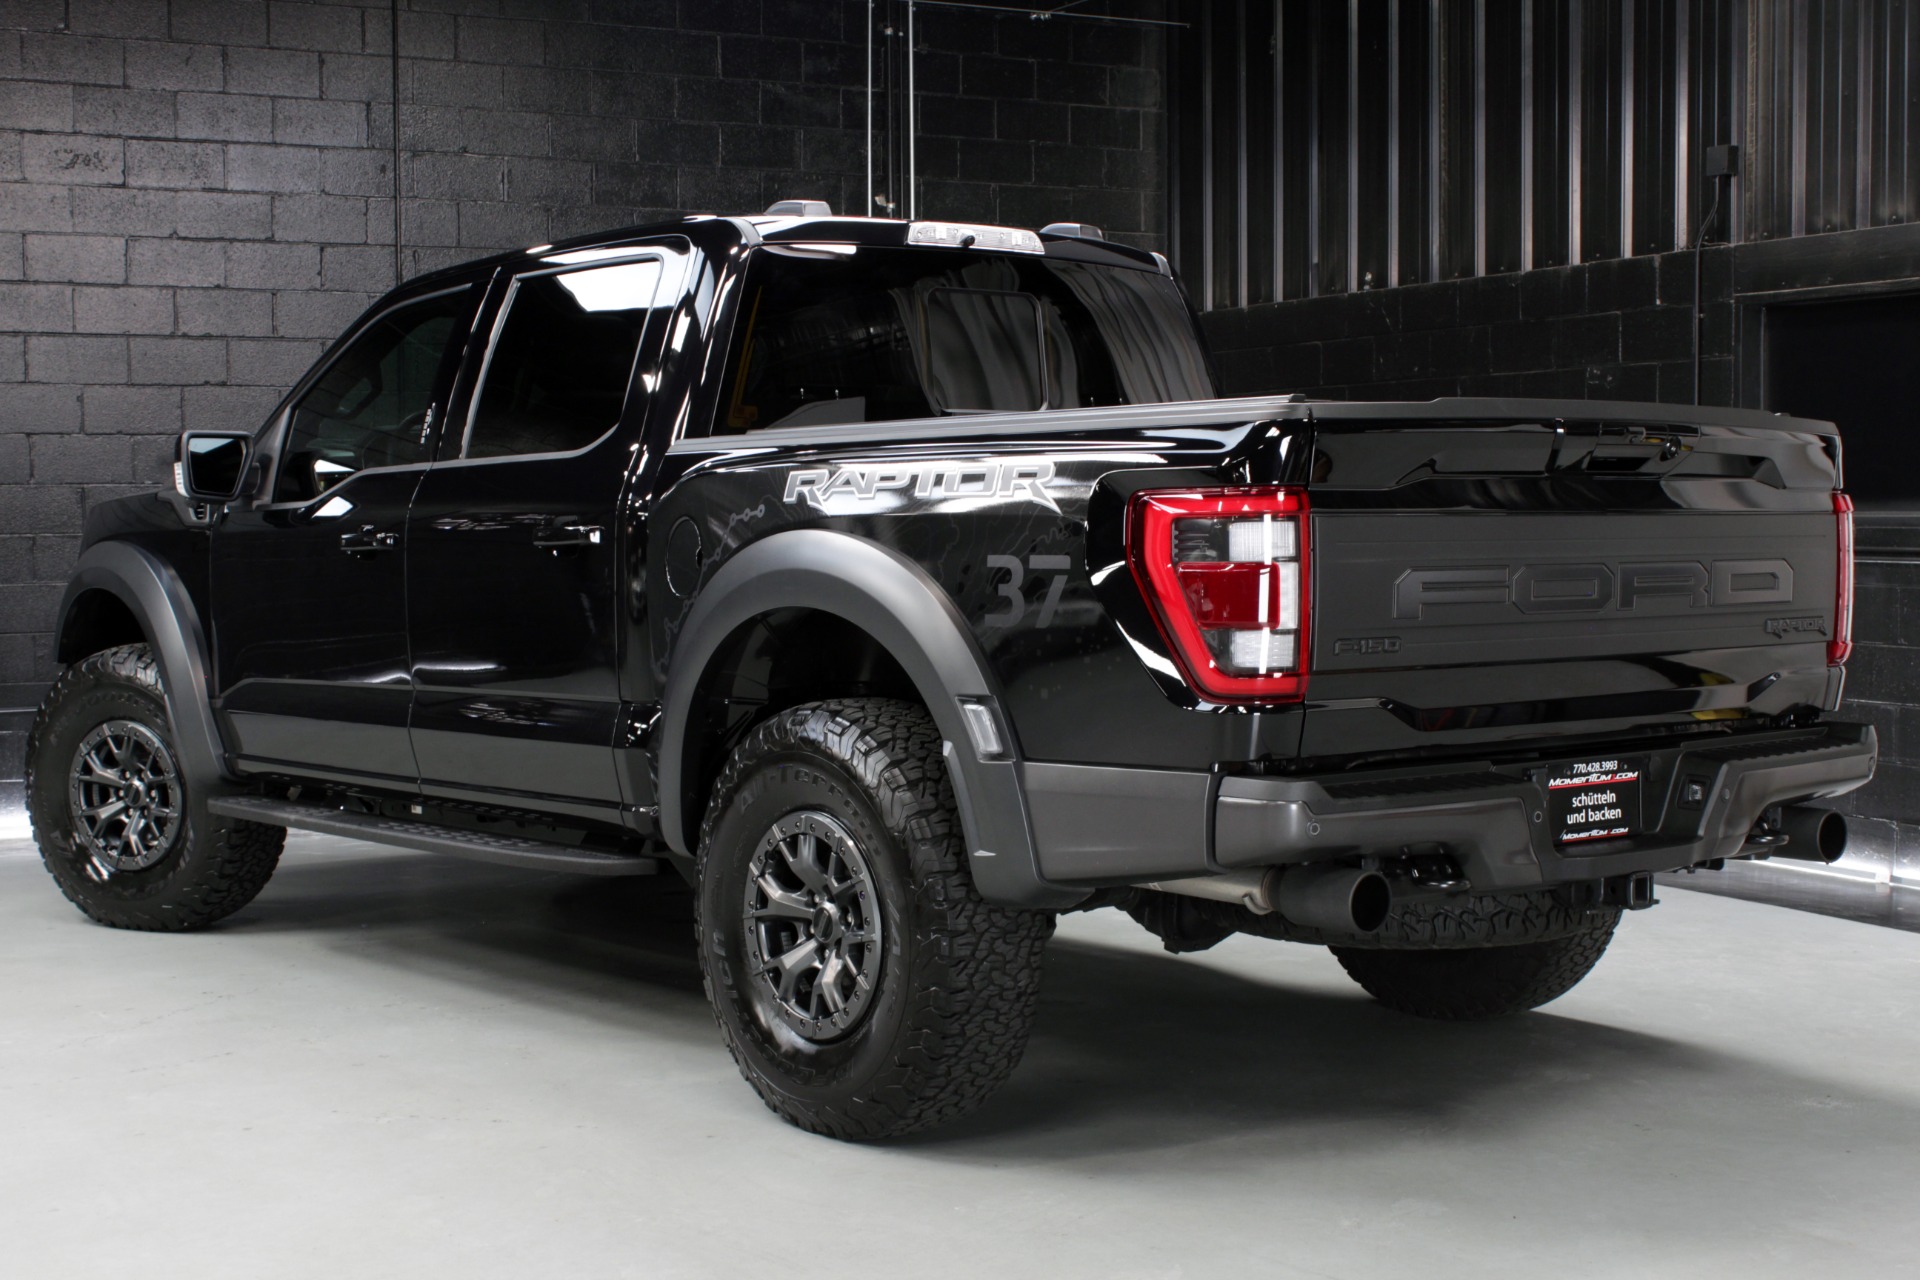 Ford Ford F-150 Raptor Super Crew Cab 37 Performance — Geigercars - Home of  US-Cars